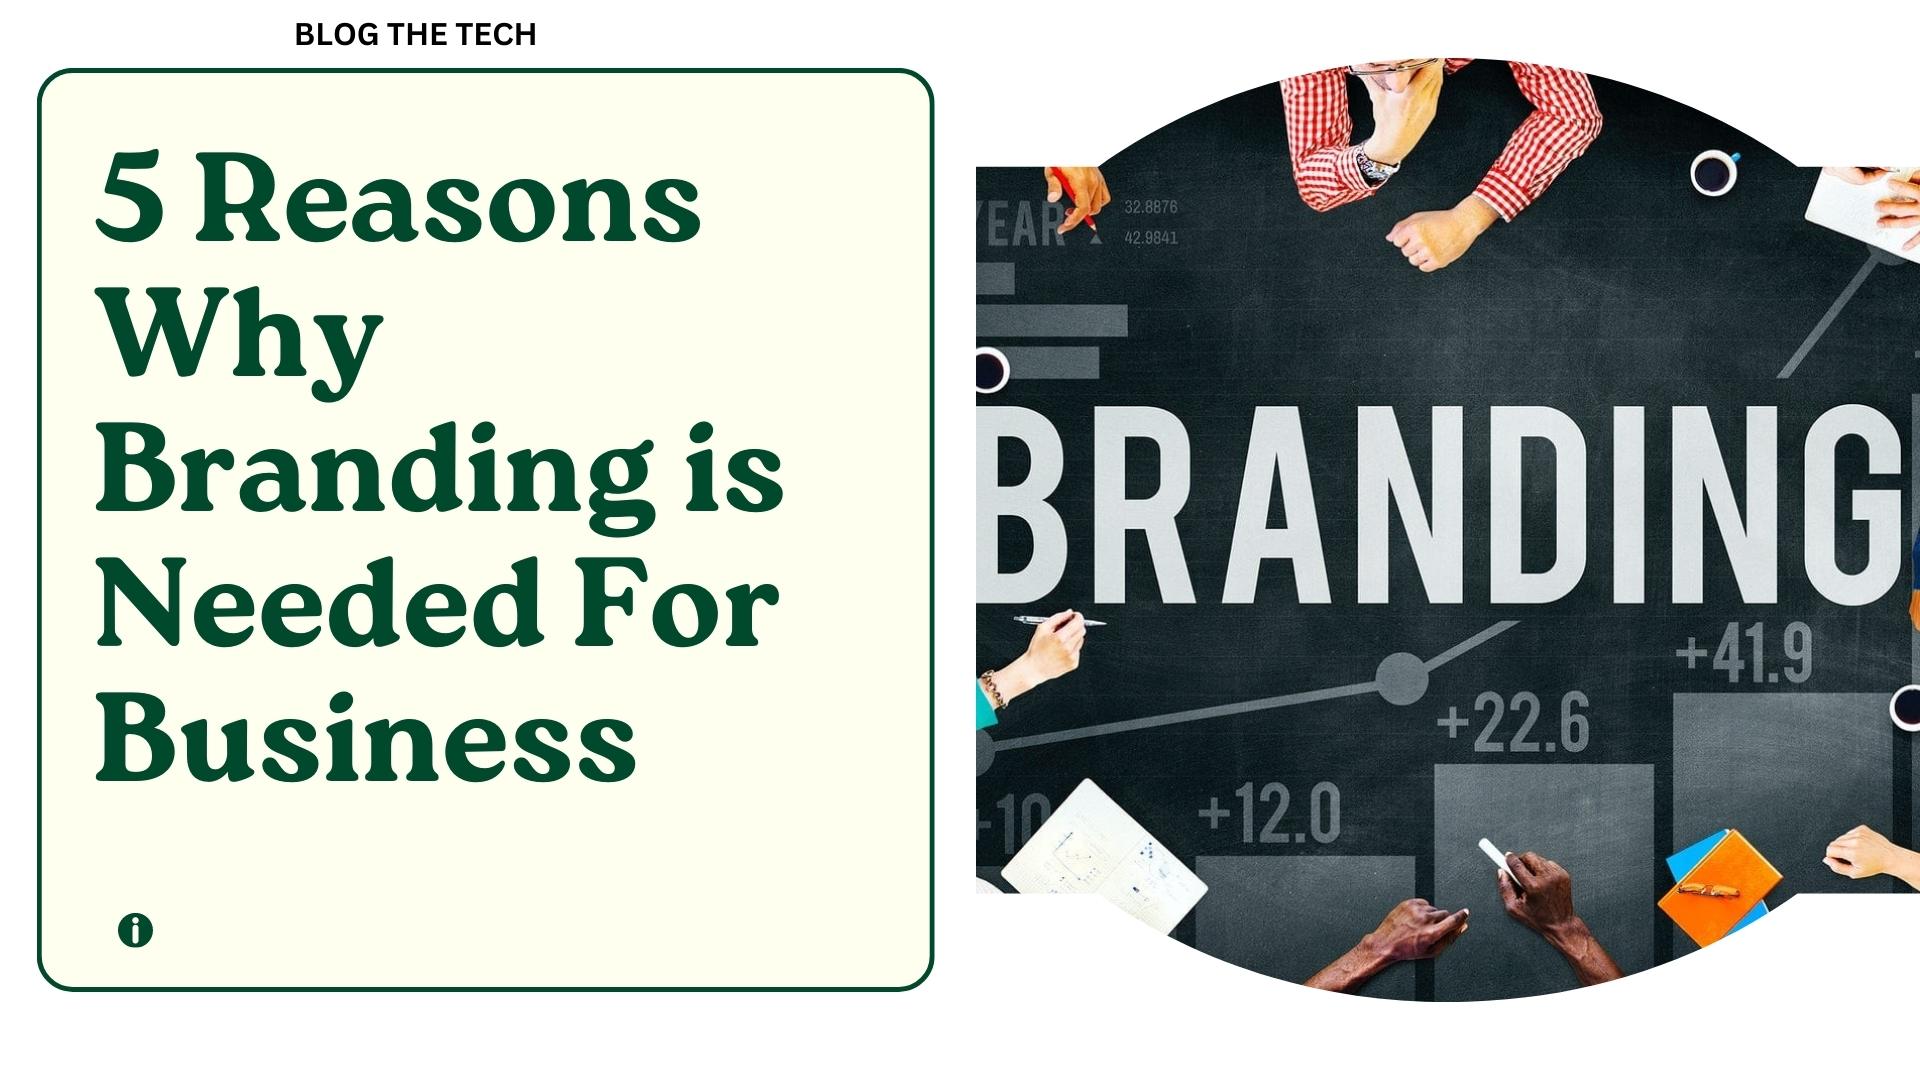 5 Reasons Why Branding is Needed For Business